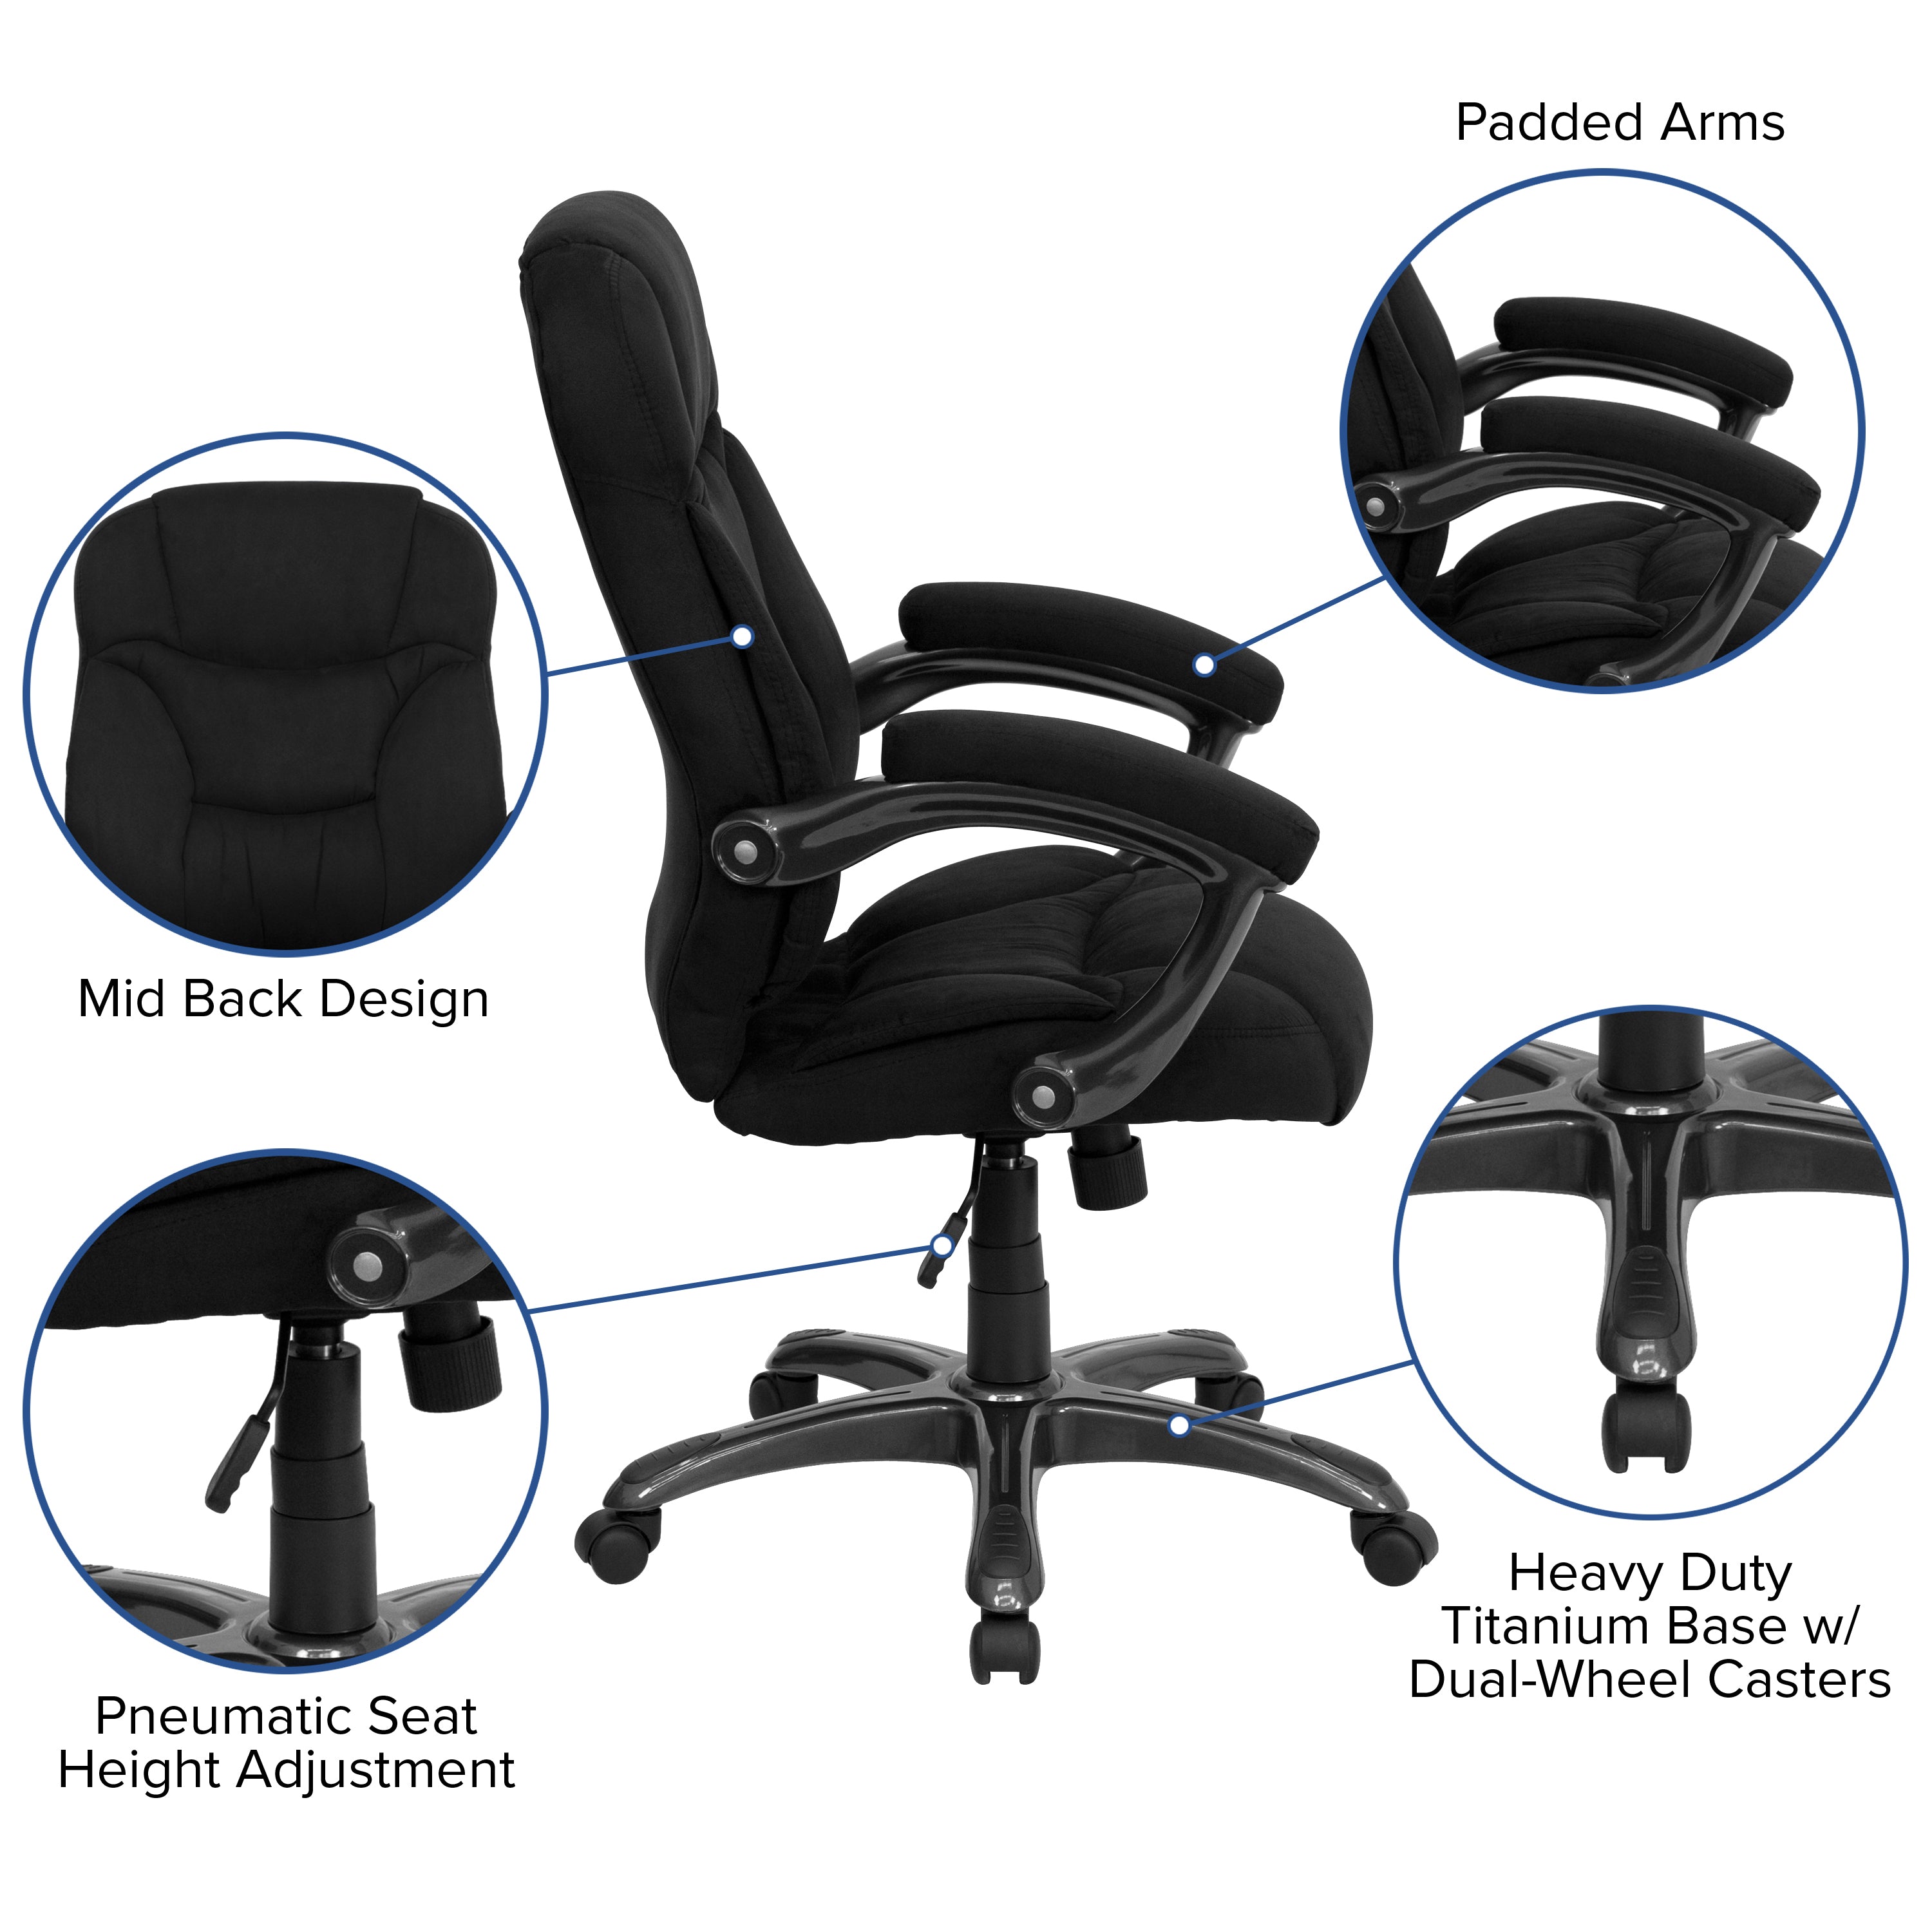 High Back Contemporary Executive Swivel Ergonomic Office Chair with Arms-Office Chair-Flash Furniture-Wall2Wall Furnishings